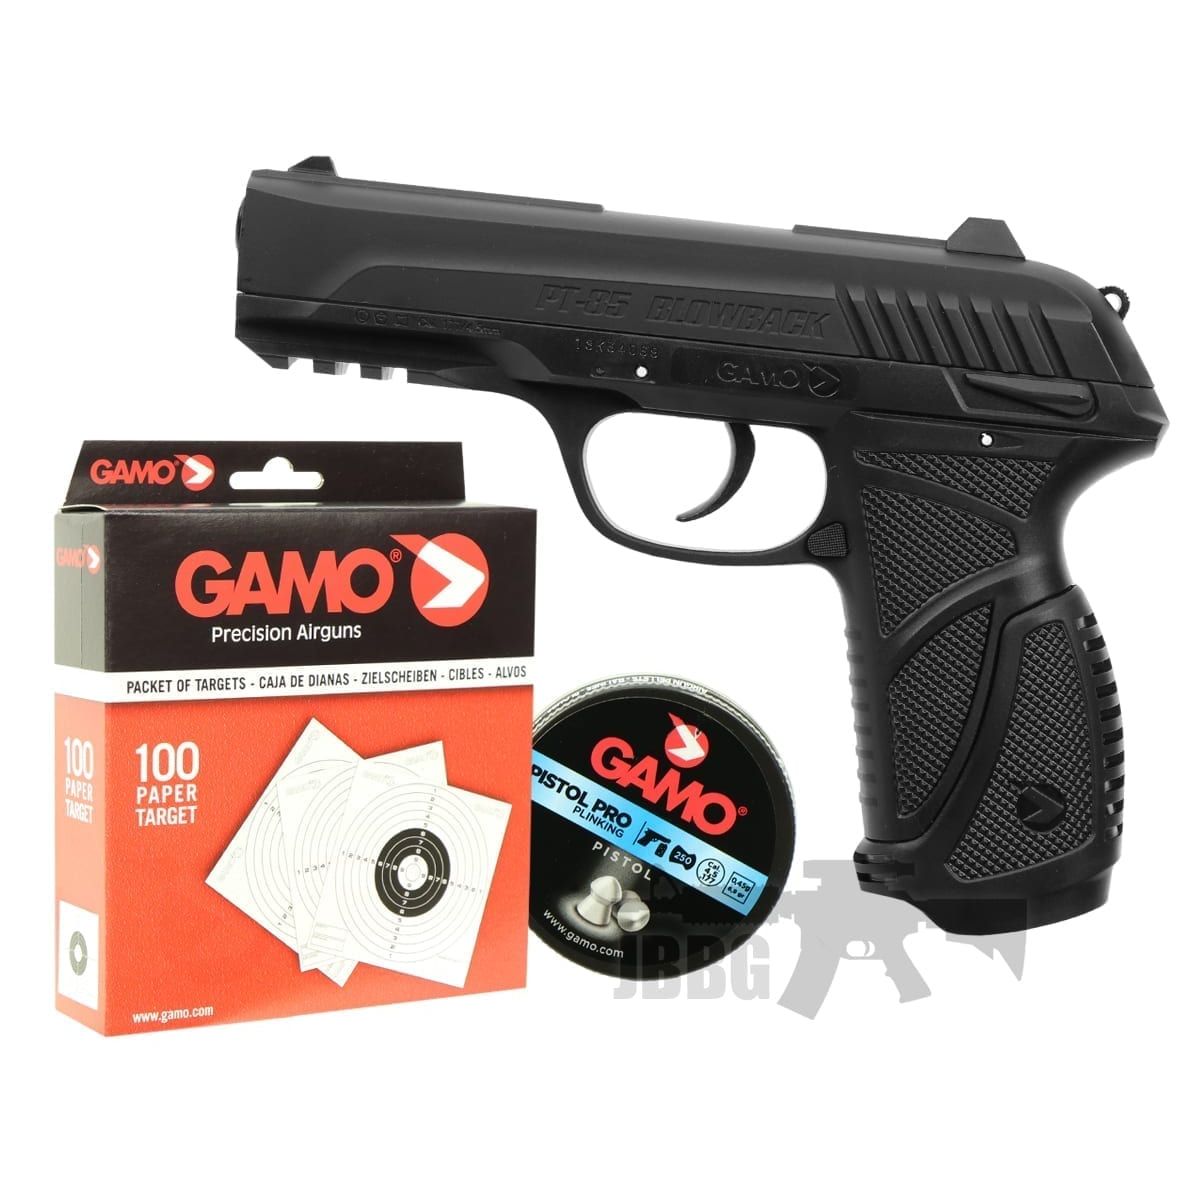 PT85 Pistol Pack with Gamo .177 Pellets and 100 Paper Targets